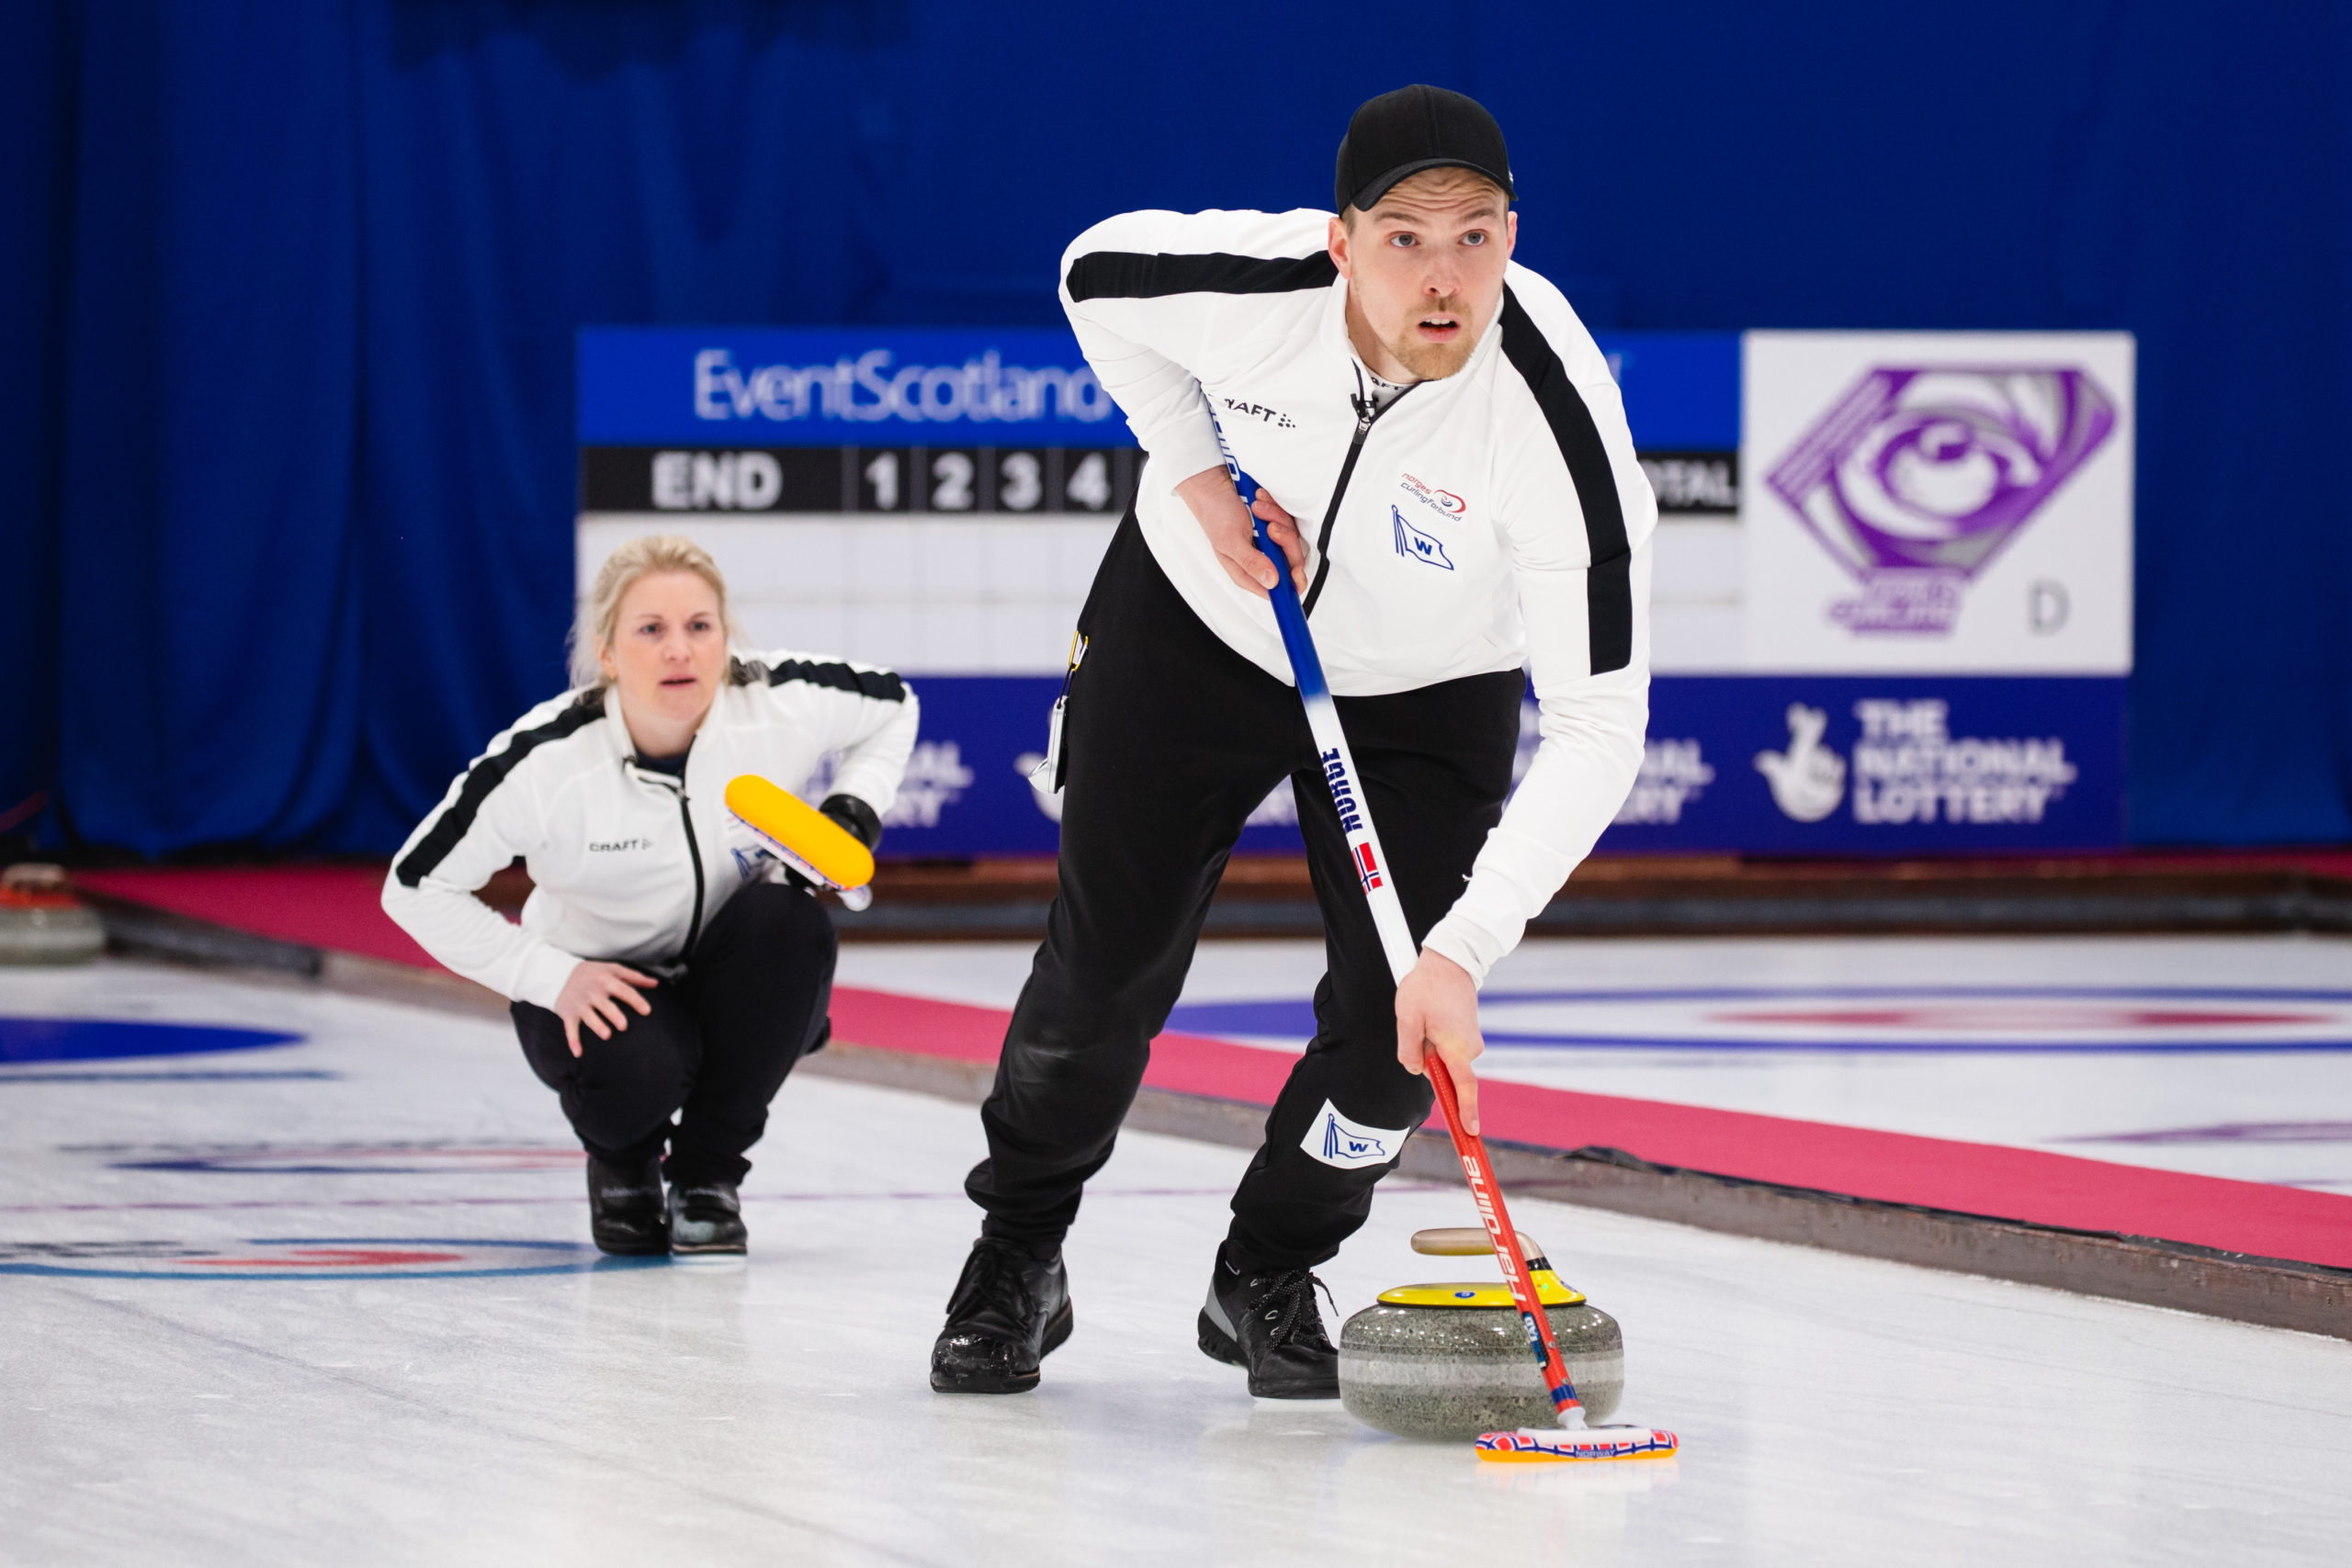 Kristin and Magnus ready to represent Norway at the Olympics in mixed doubles